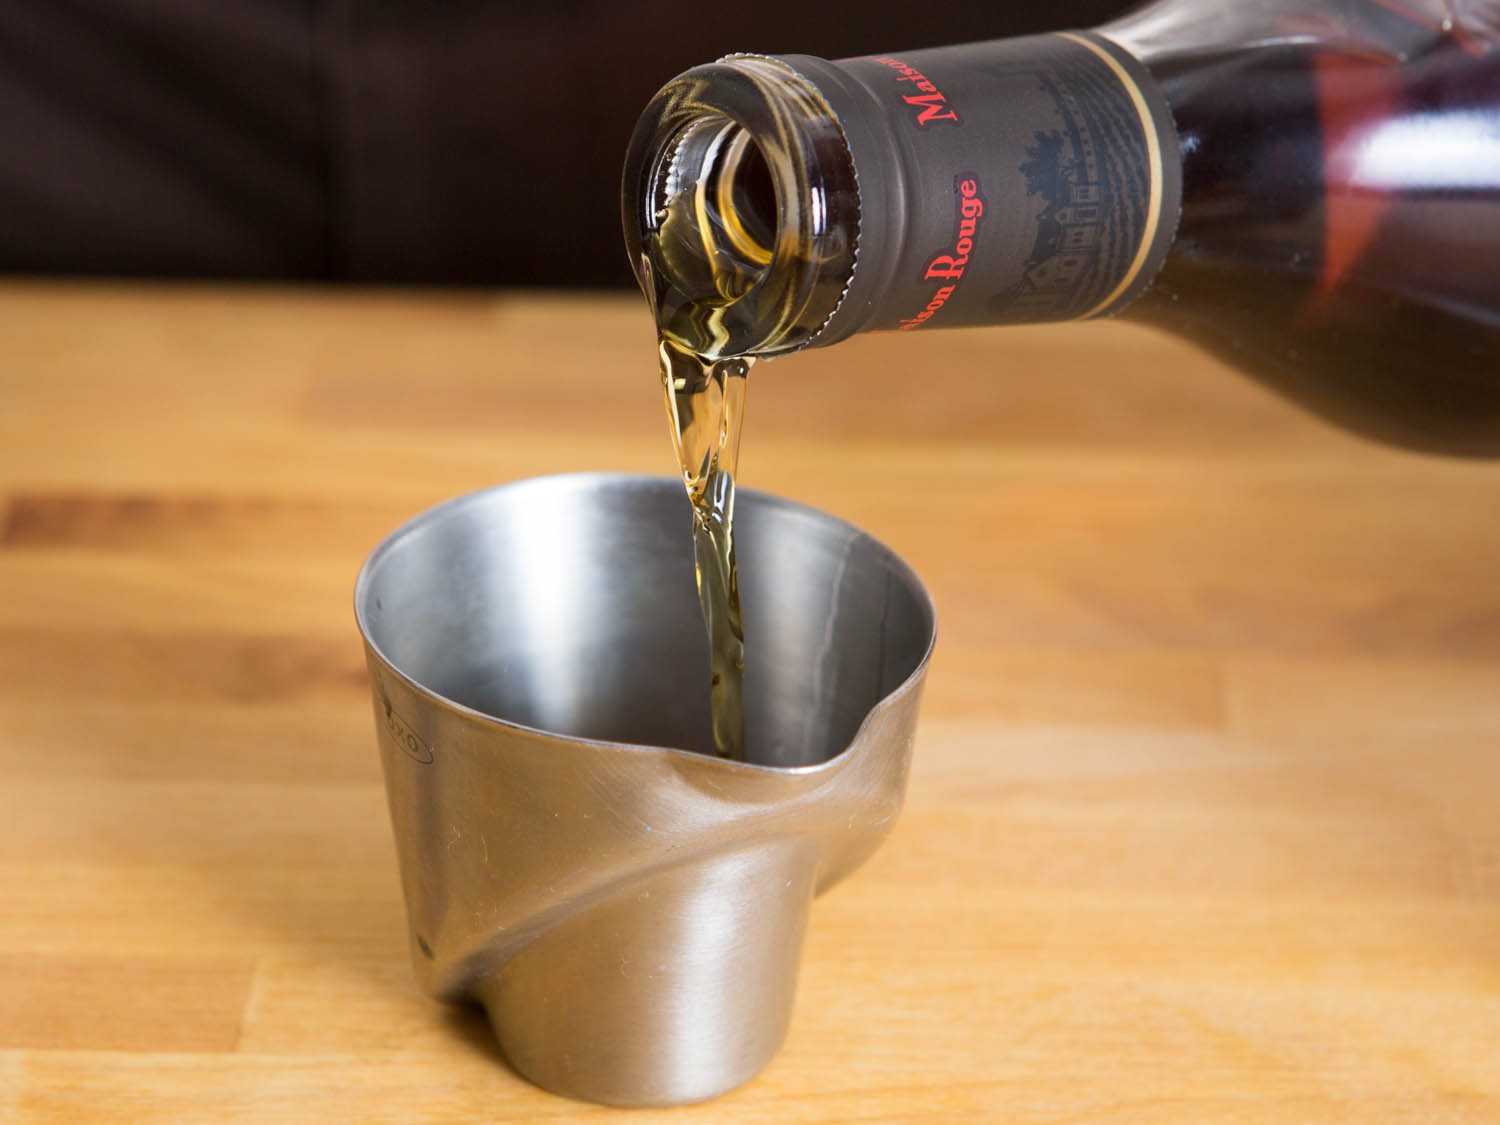 Pouring from a bottle into a miniature metal measuring cup